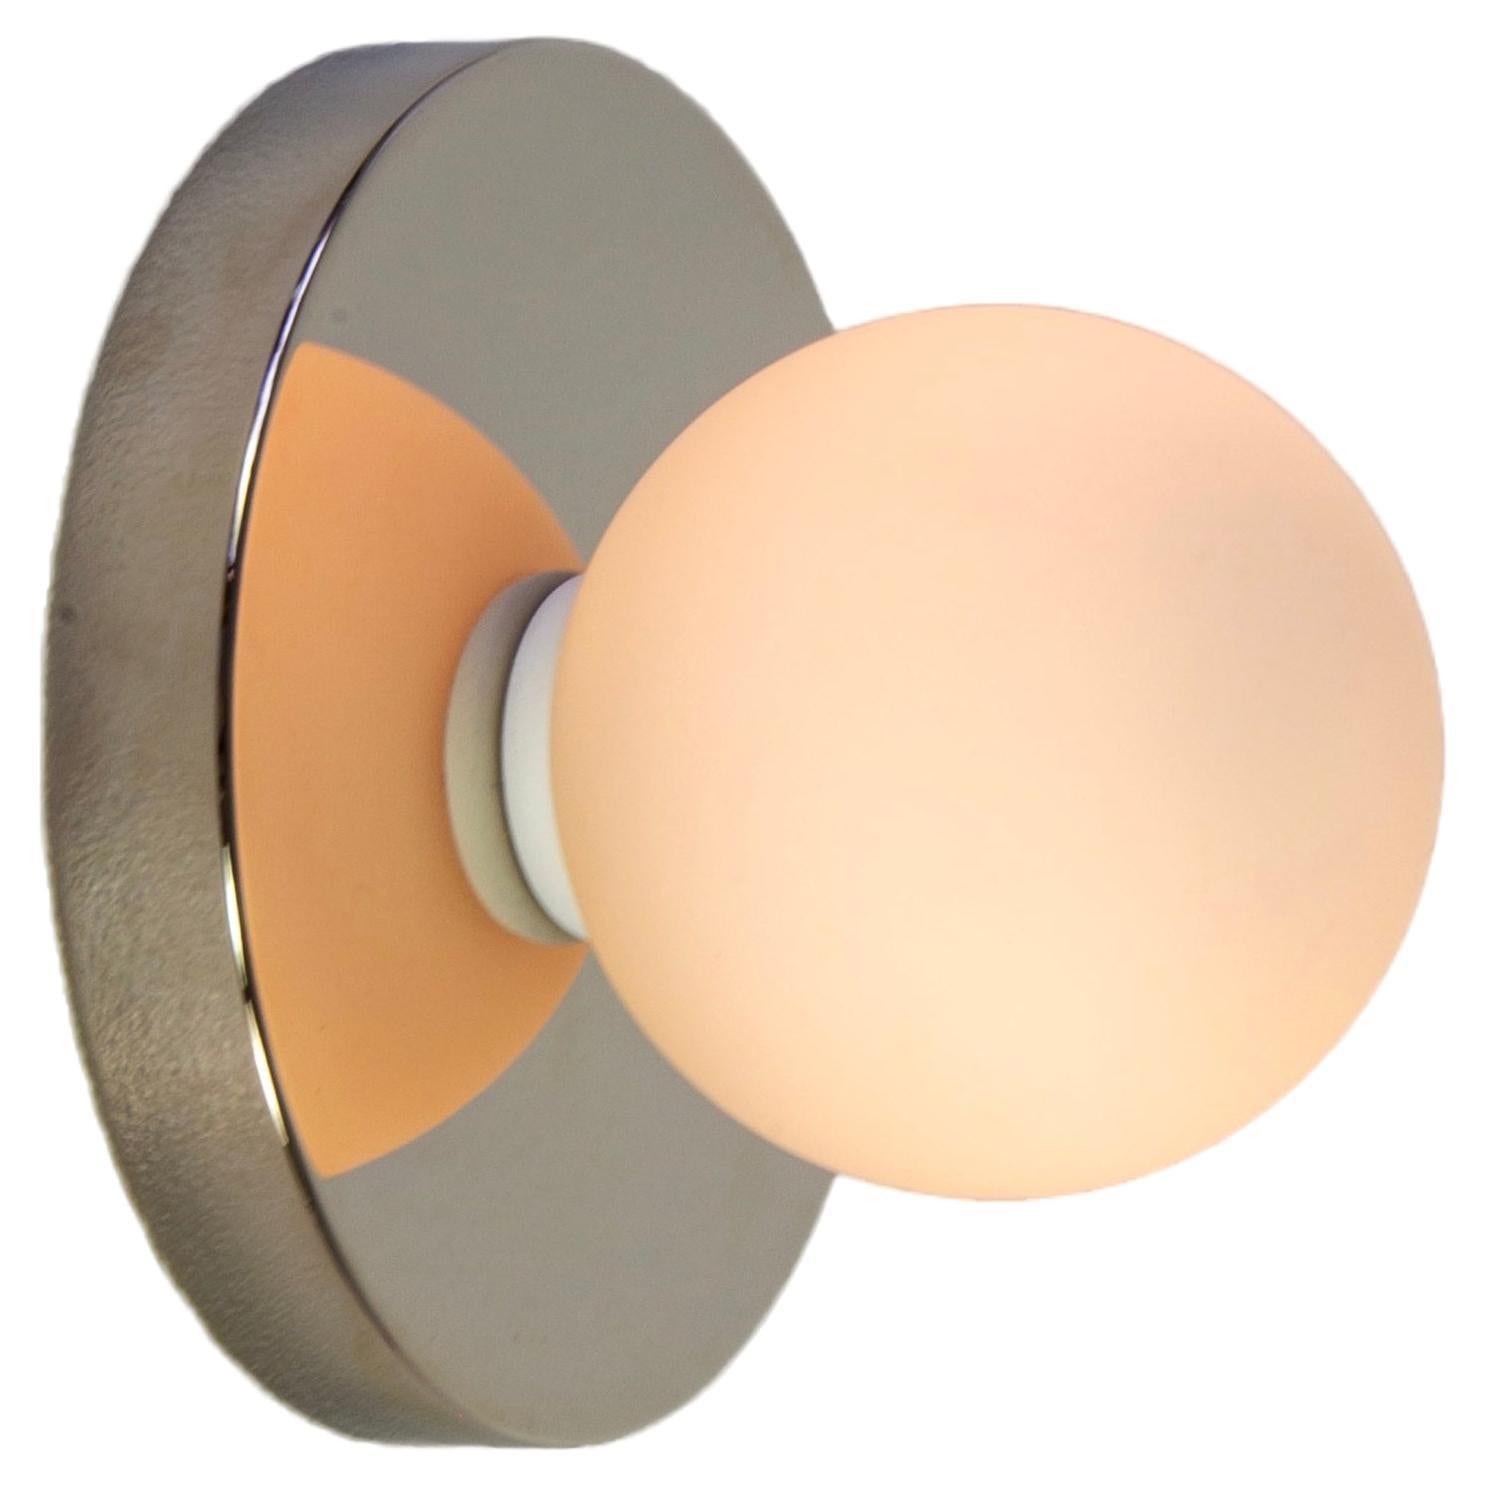 Globe Sconce by Research.Lighting, Polished Nickel, In Stock